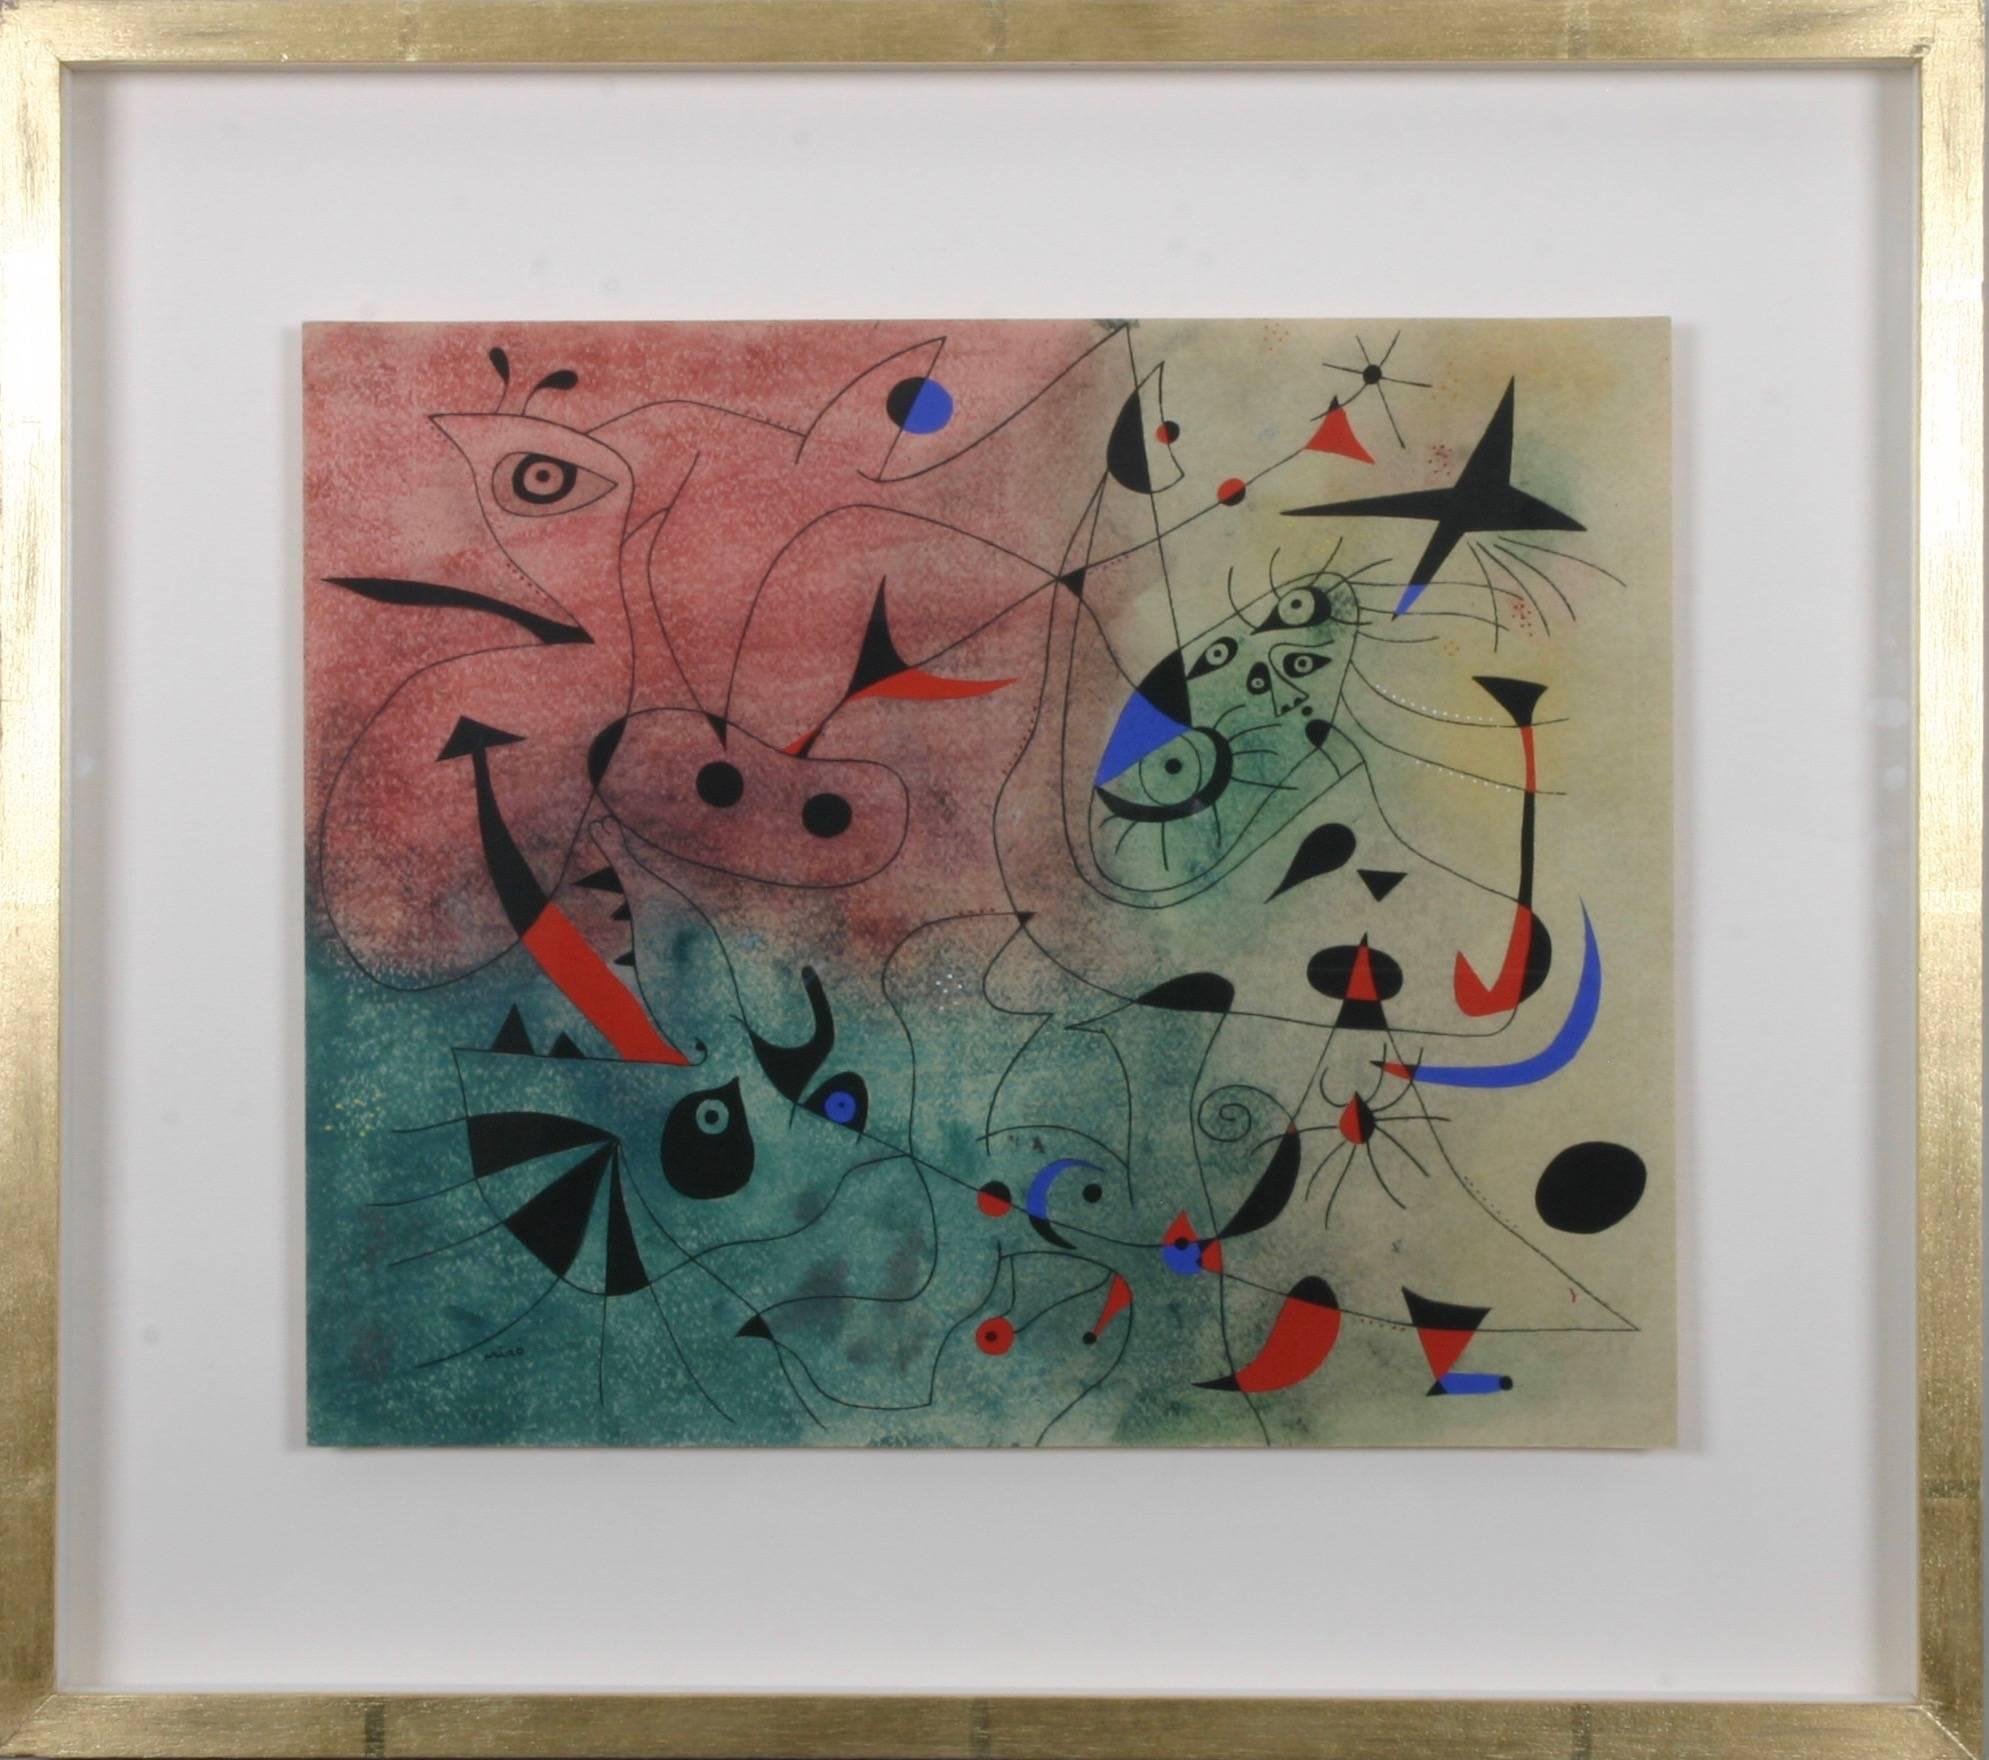 (after) Joan Miró Abstract Print - The Constellations: L'Etoile Mantinale/ Morning Star, Plt VI